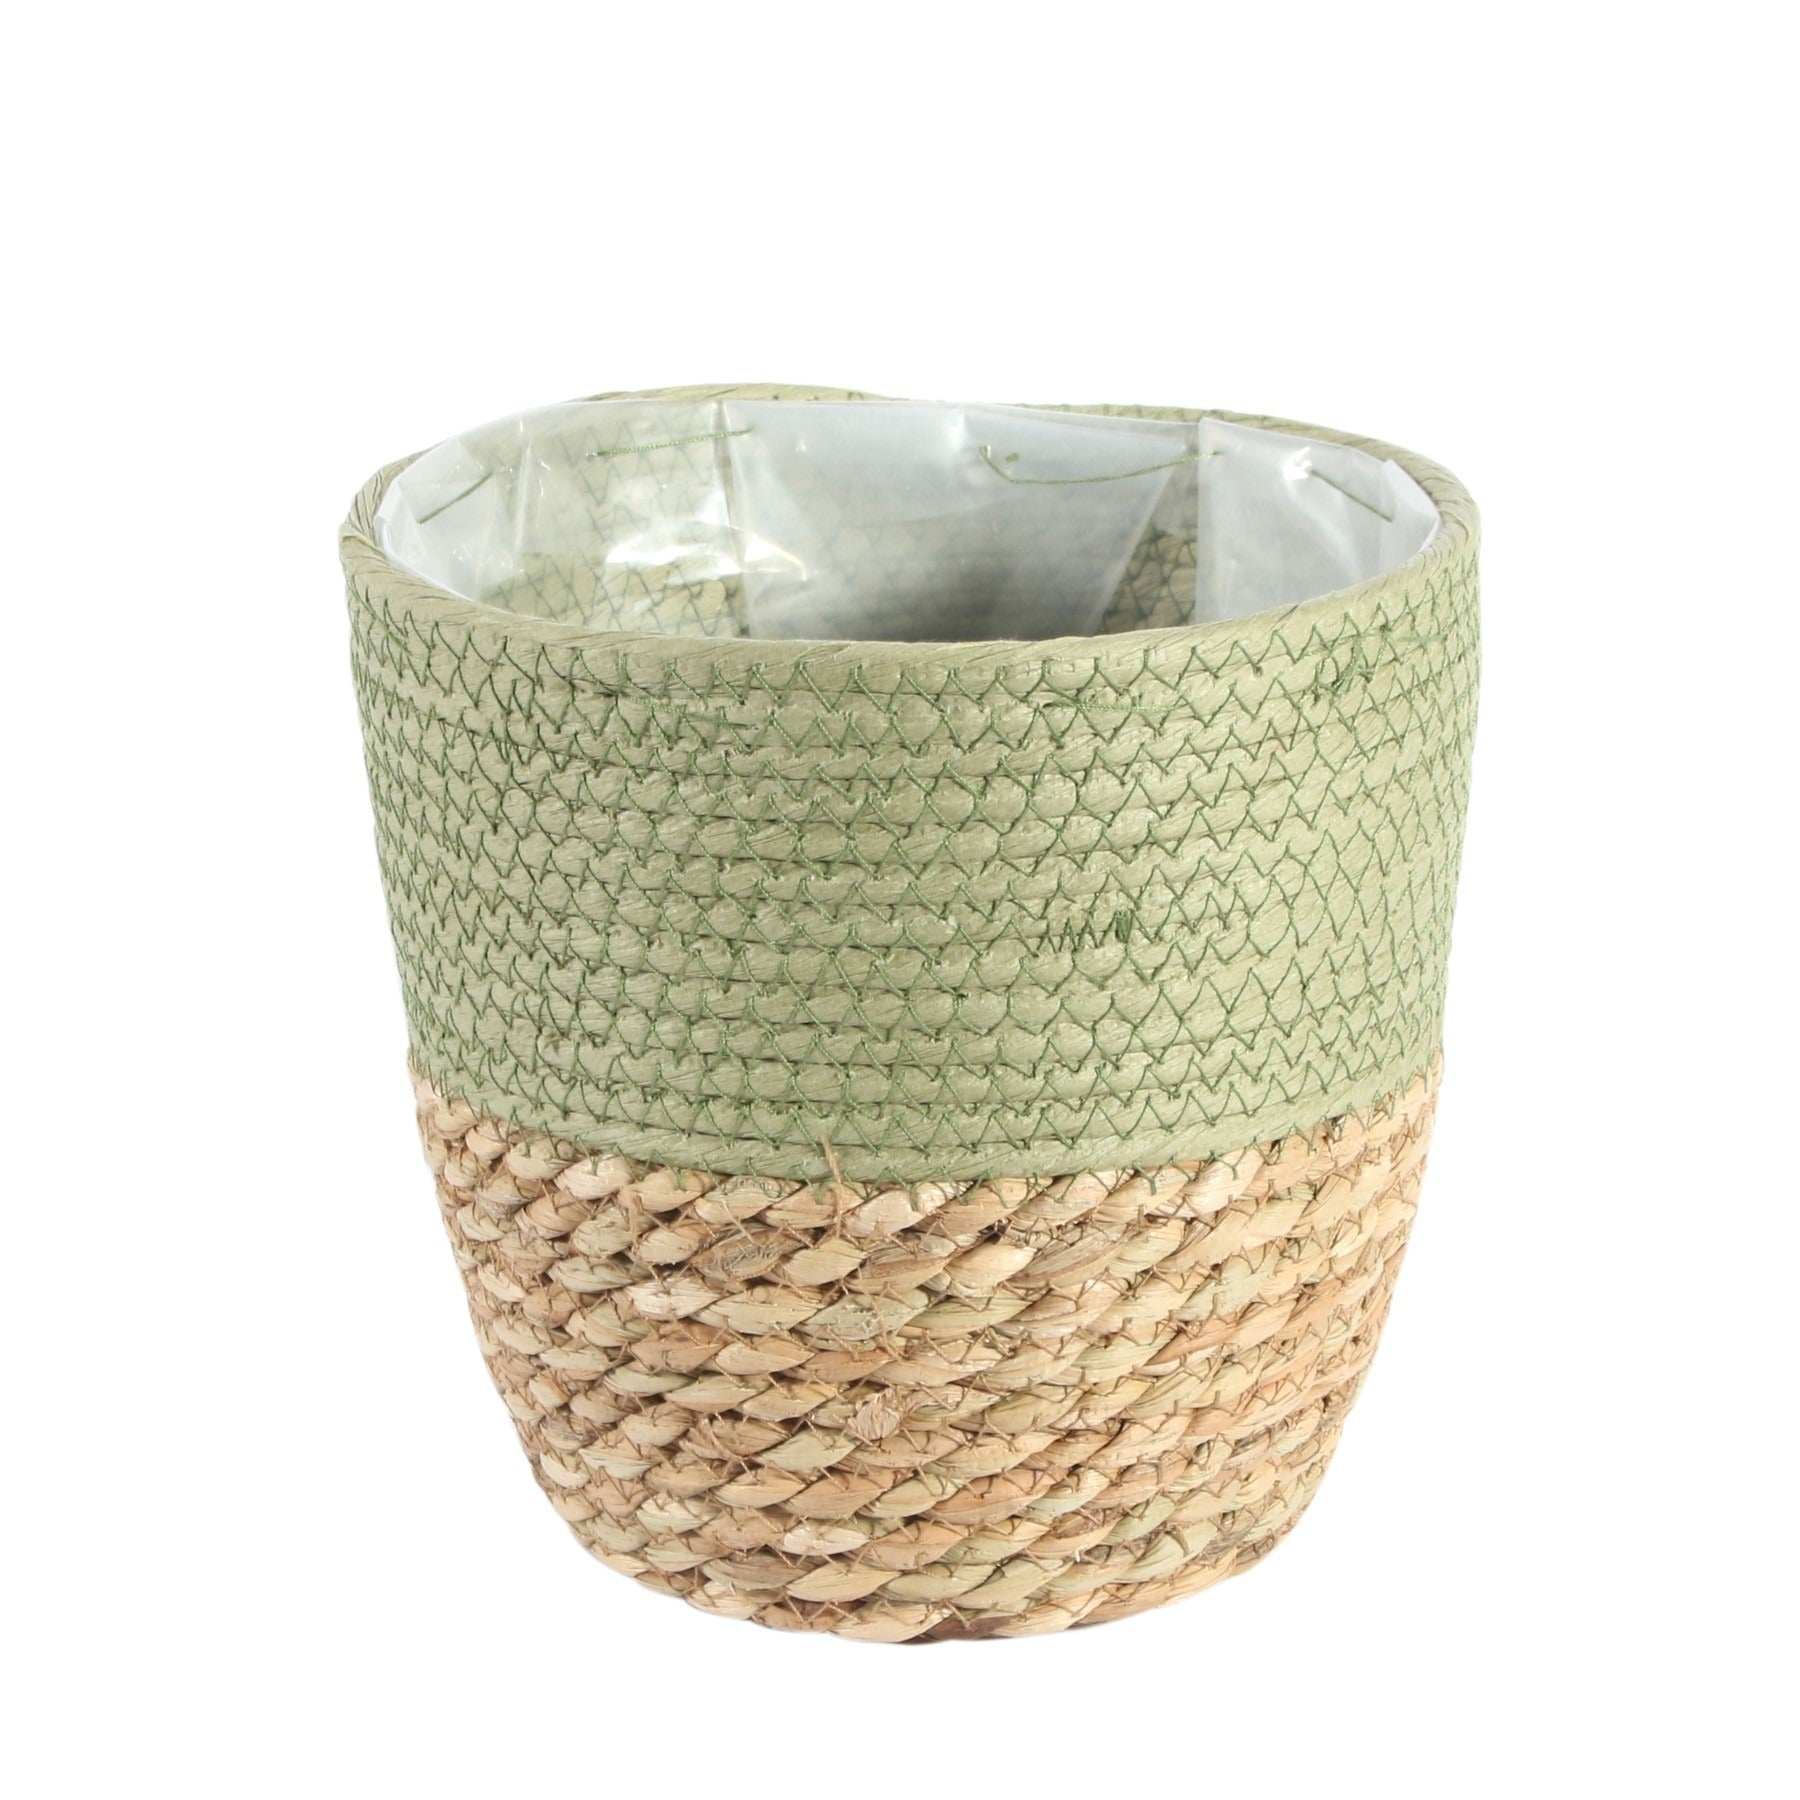 View 19cm Round Two Tone Seagrass and Green Paper Basket information